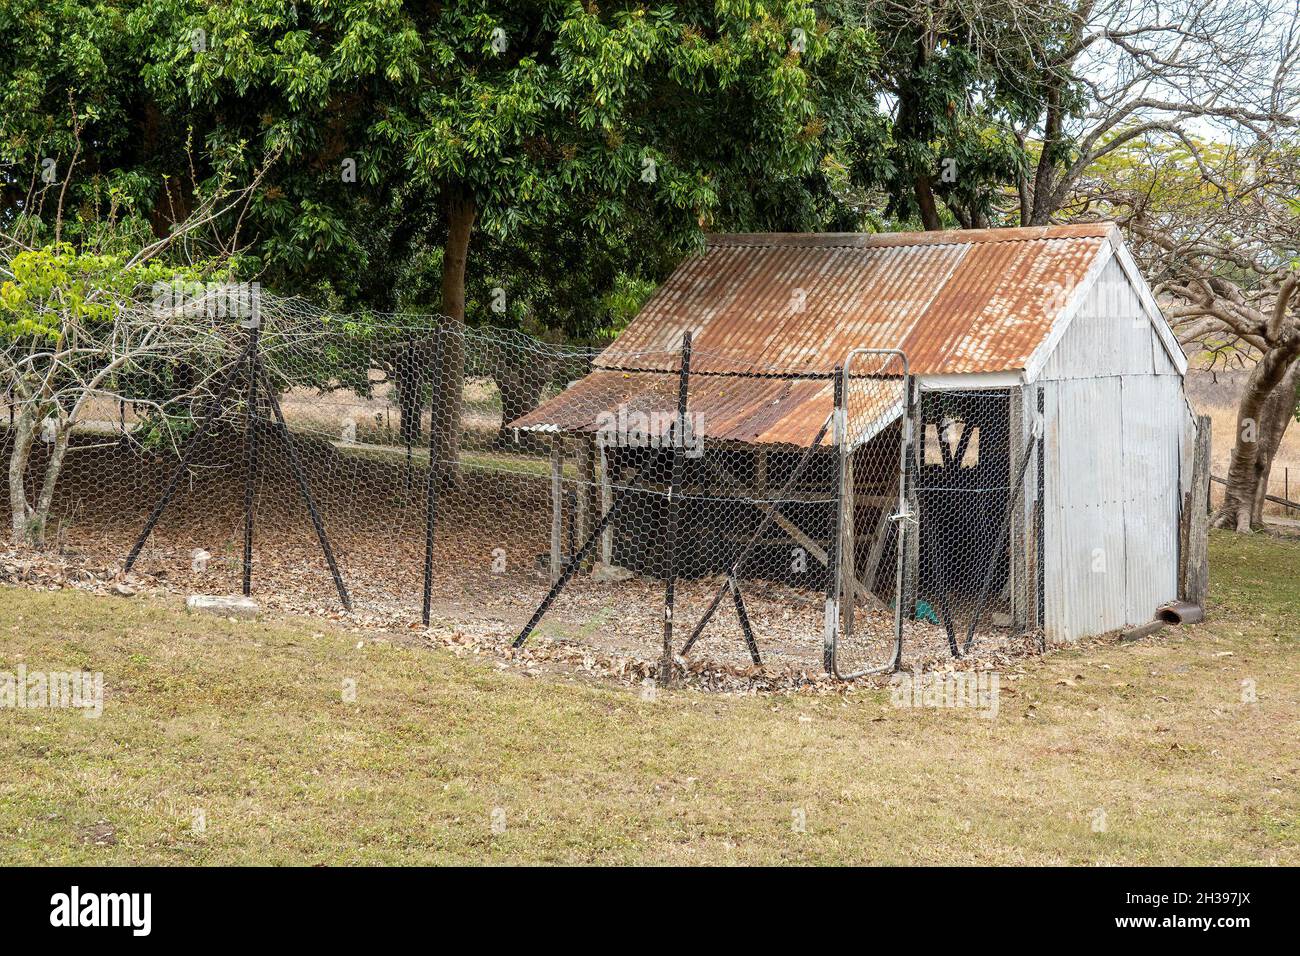 An old dilapidated rusting chicken house fenced with netted wire to form a pen enclosure Stock Photo